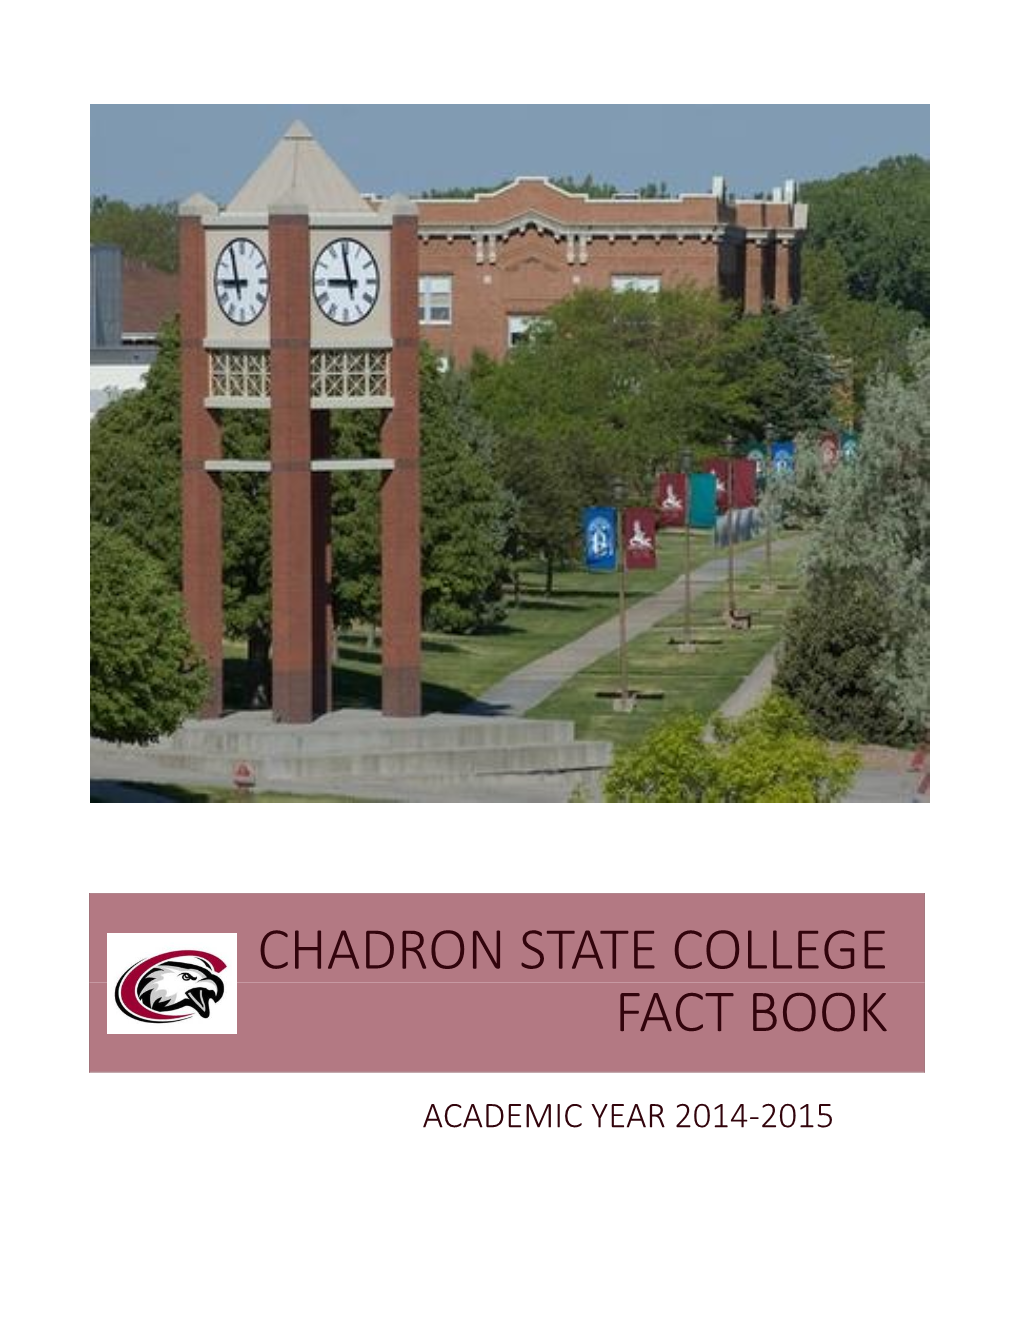 Chadron State College Fact Book